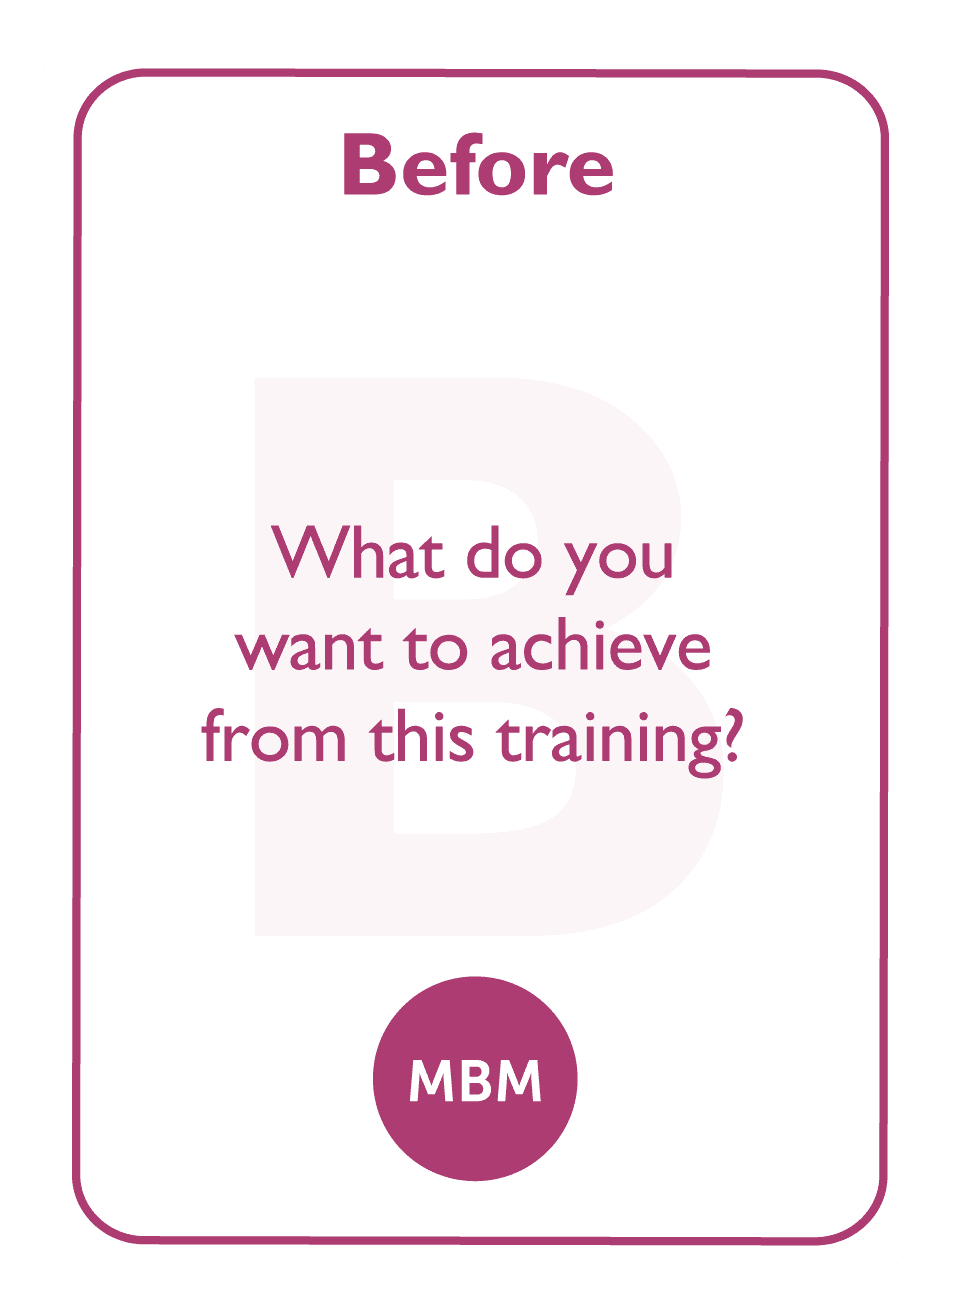 Learning to Learn coaching card titled Before